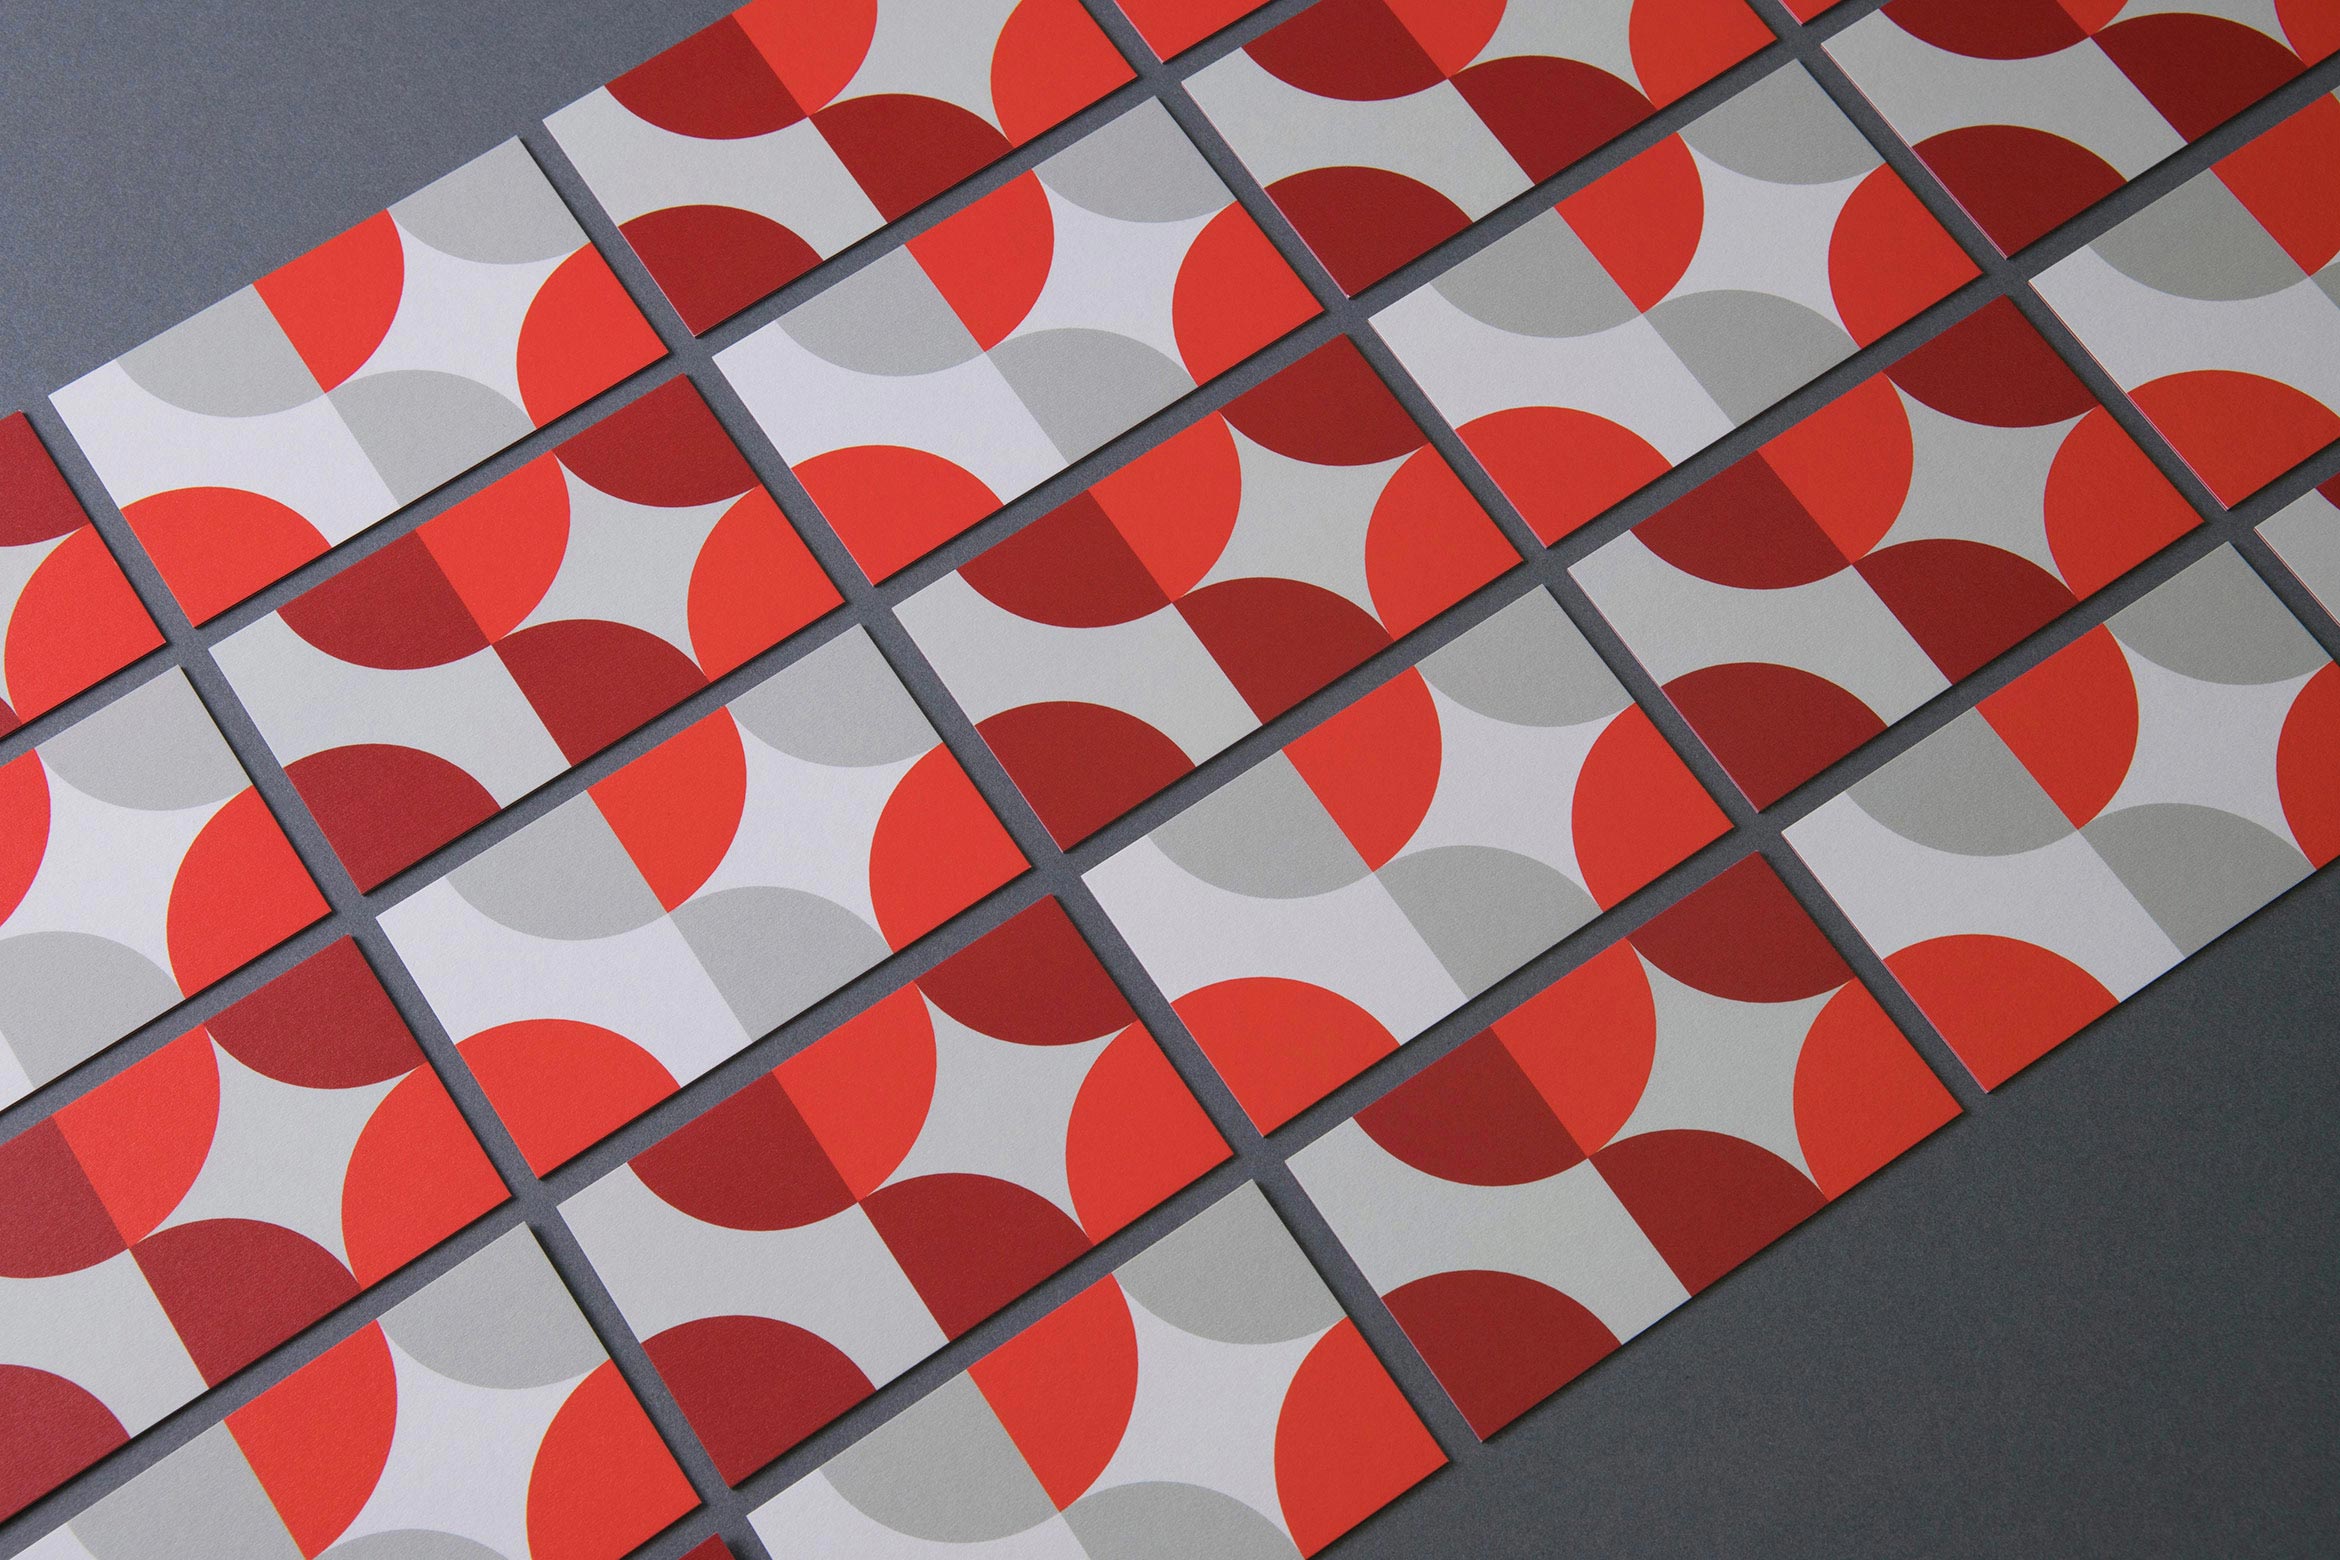 grid of lined up soren west business cards with red and gray dot pattern